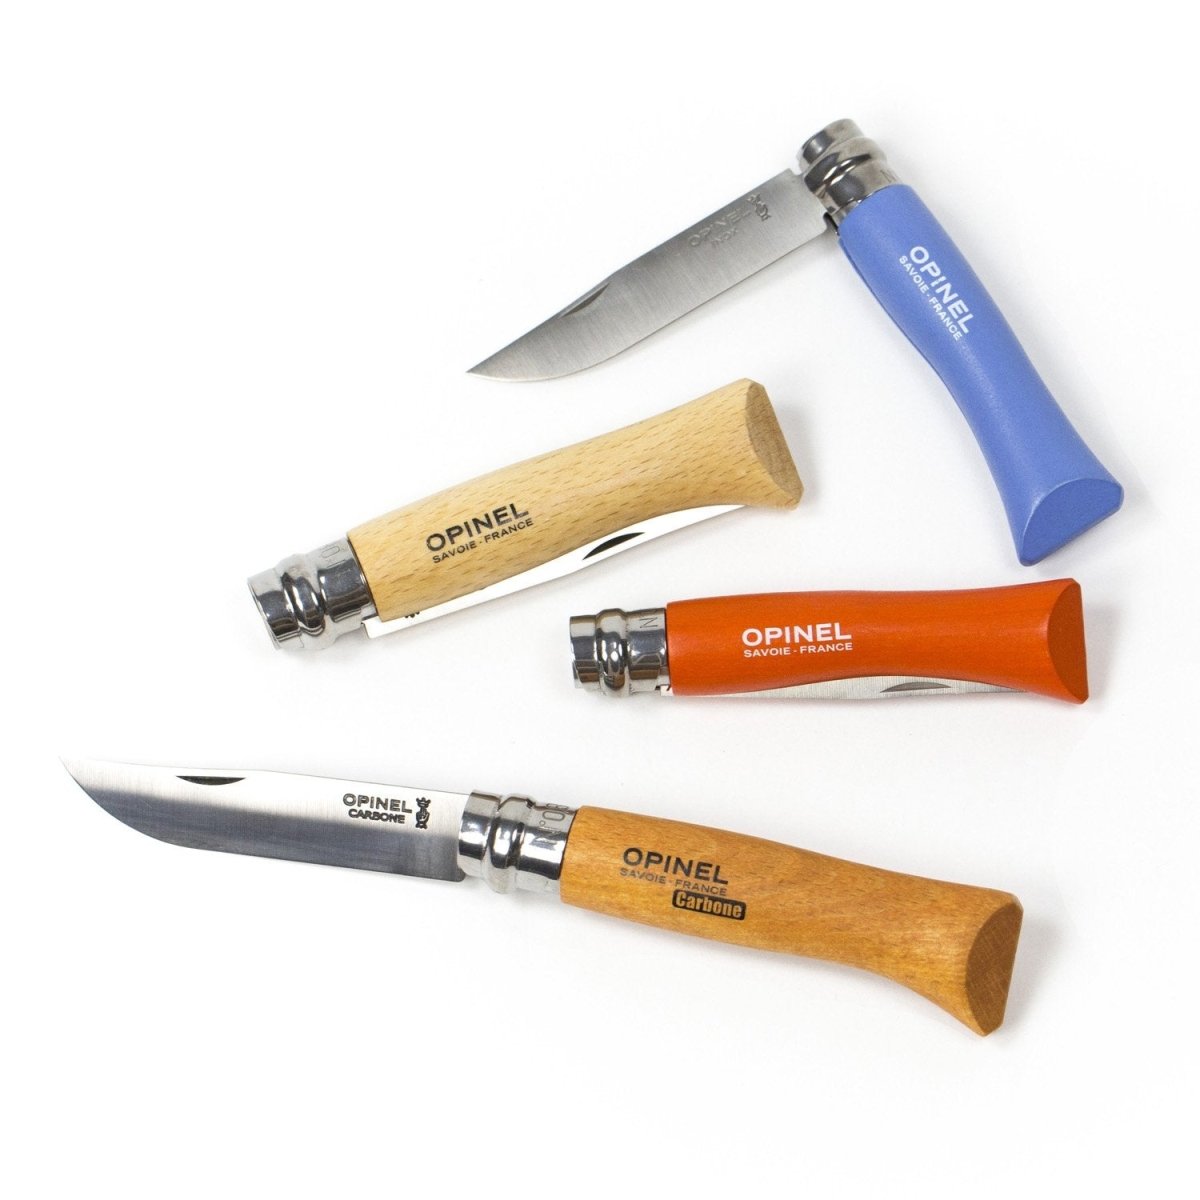 Opinel Stainless Steel Folding Knife - No 7 Coloured Variants